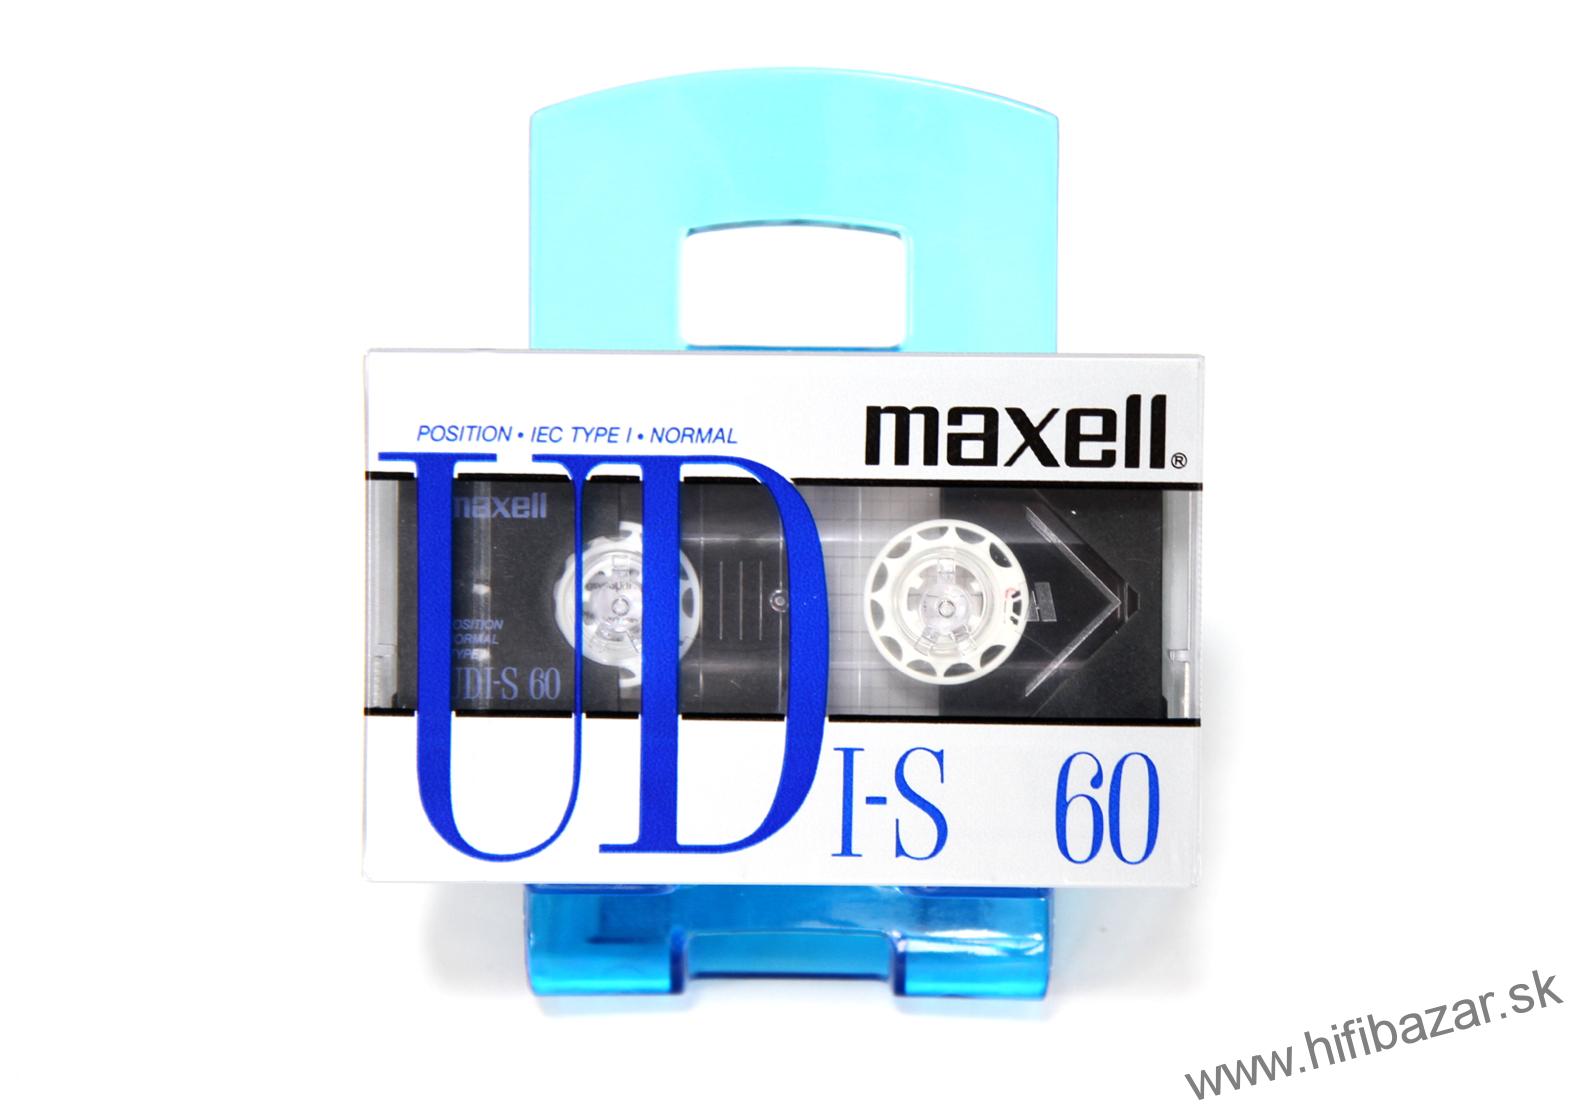 MAXELL UDI-S60 Position Normal